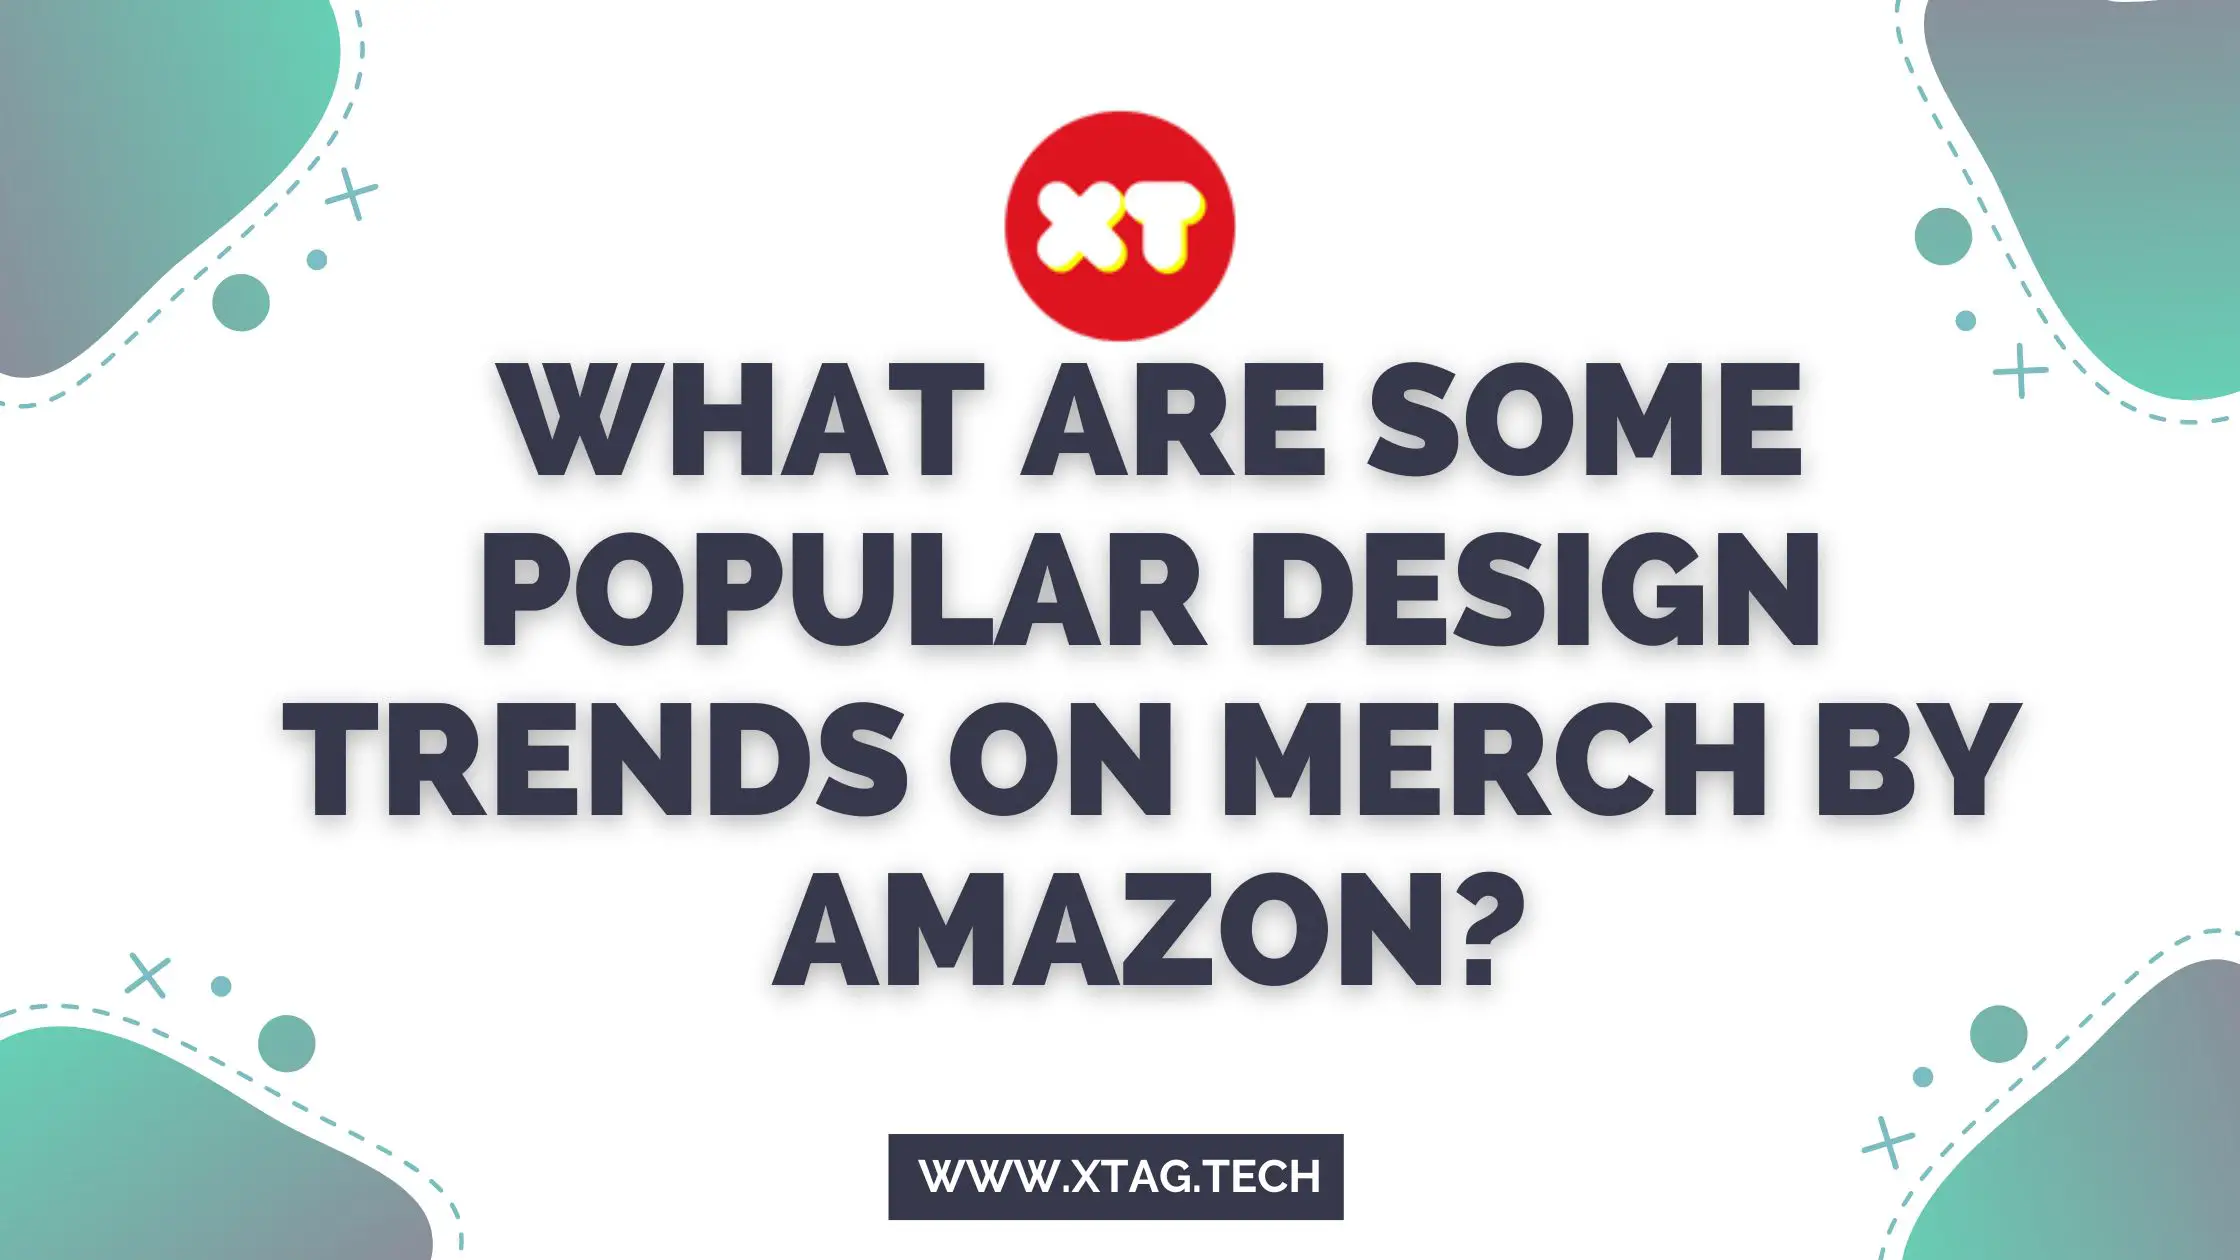 What Are Some Popular Design Trends On Merch By Amazon?